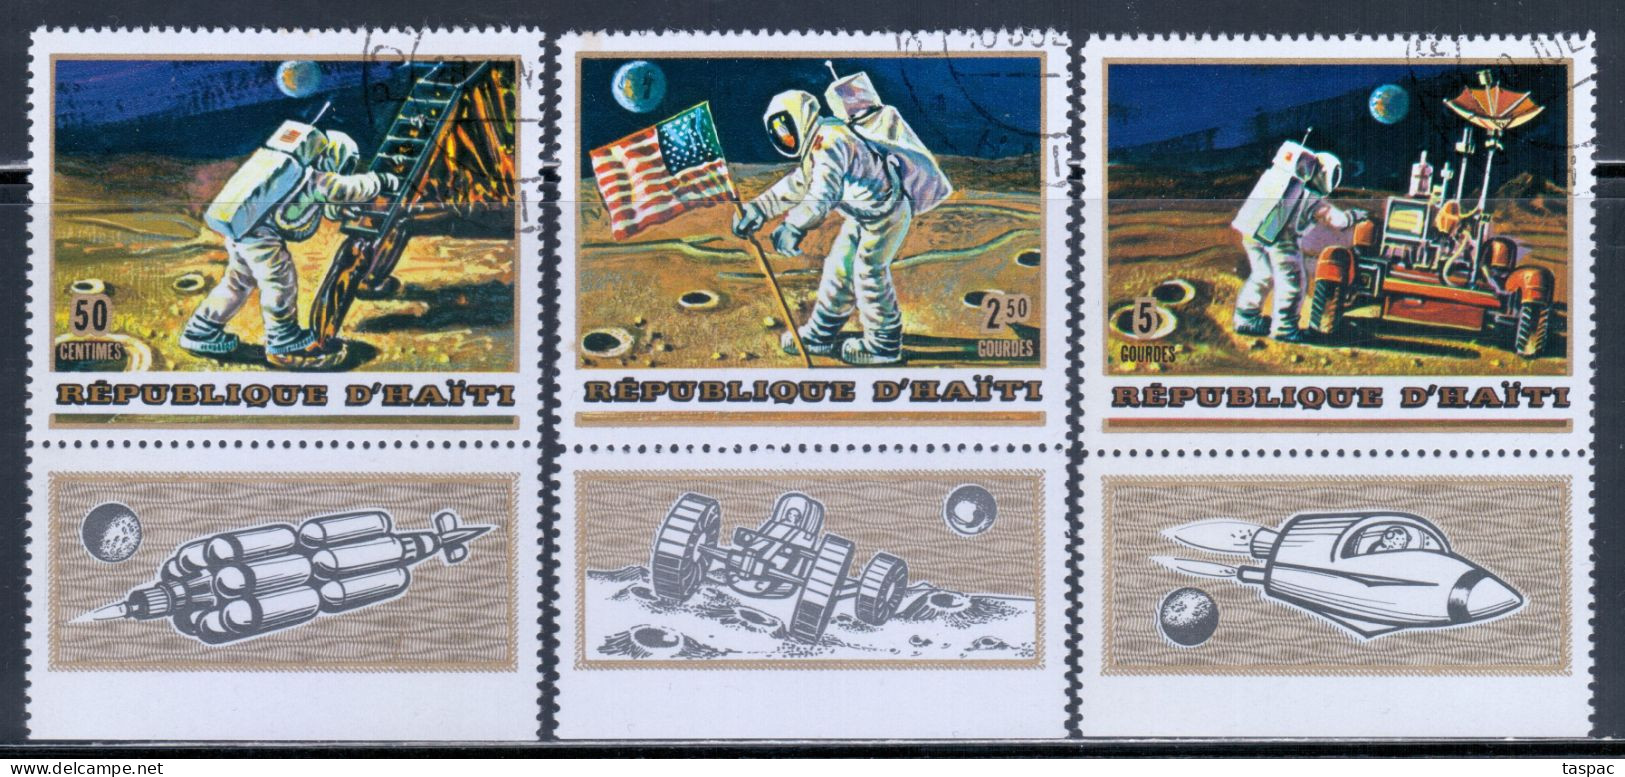 Haiti 1973 Mi# Not Listed - Unofficial Set Of 3 Used - With Ill. Margins - Apollo / Space - Nordamerika